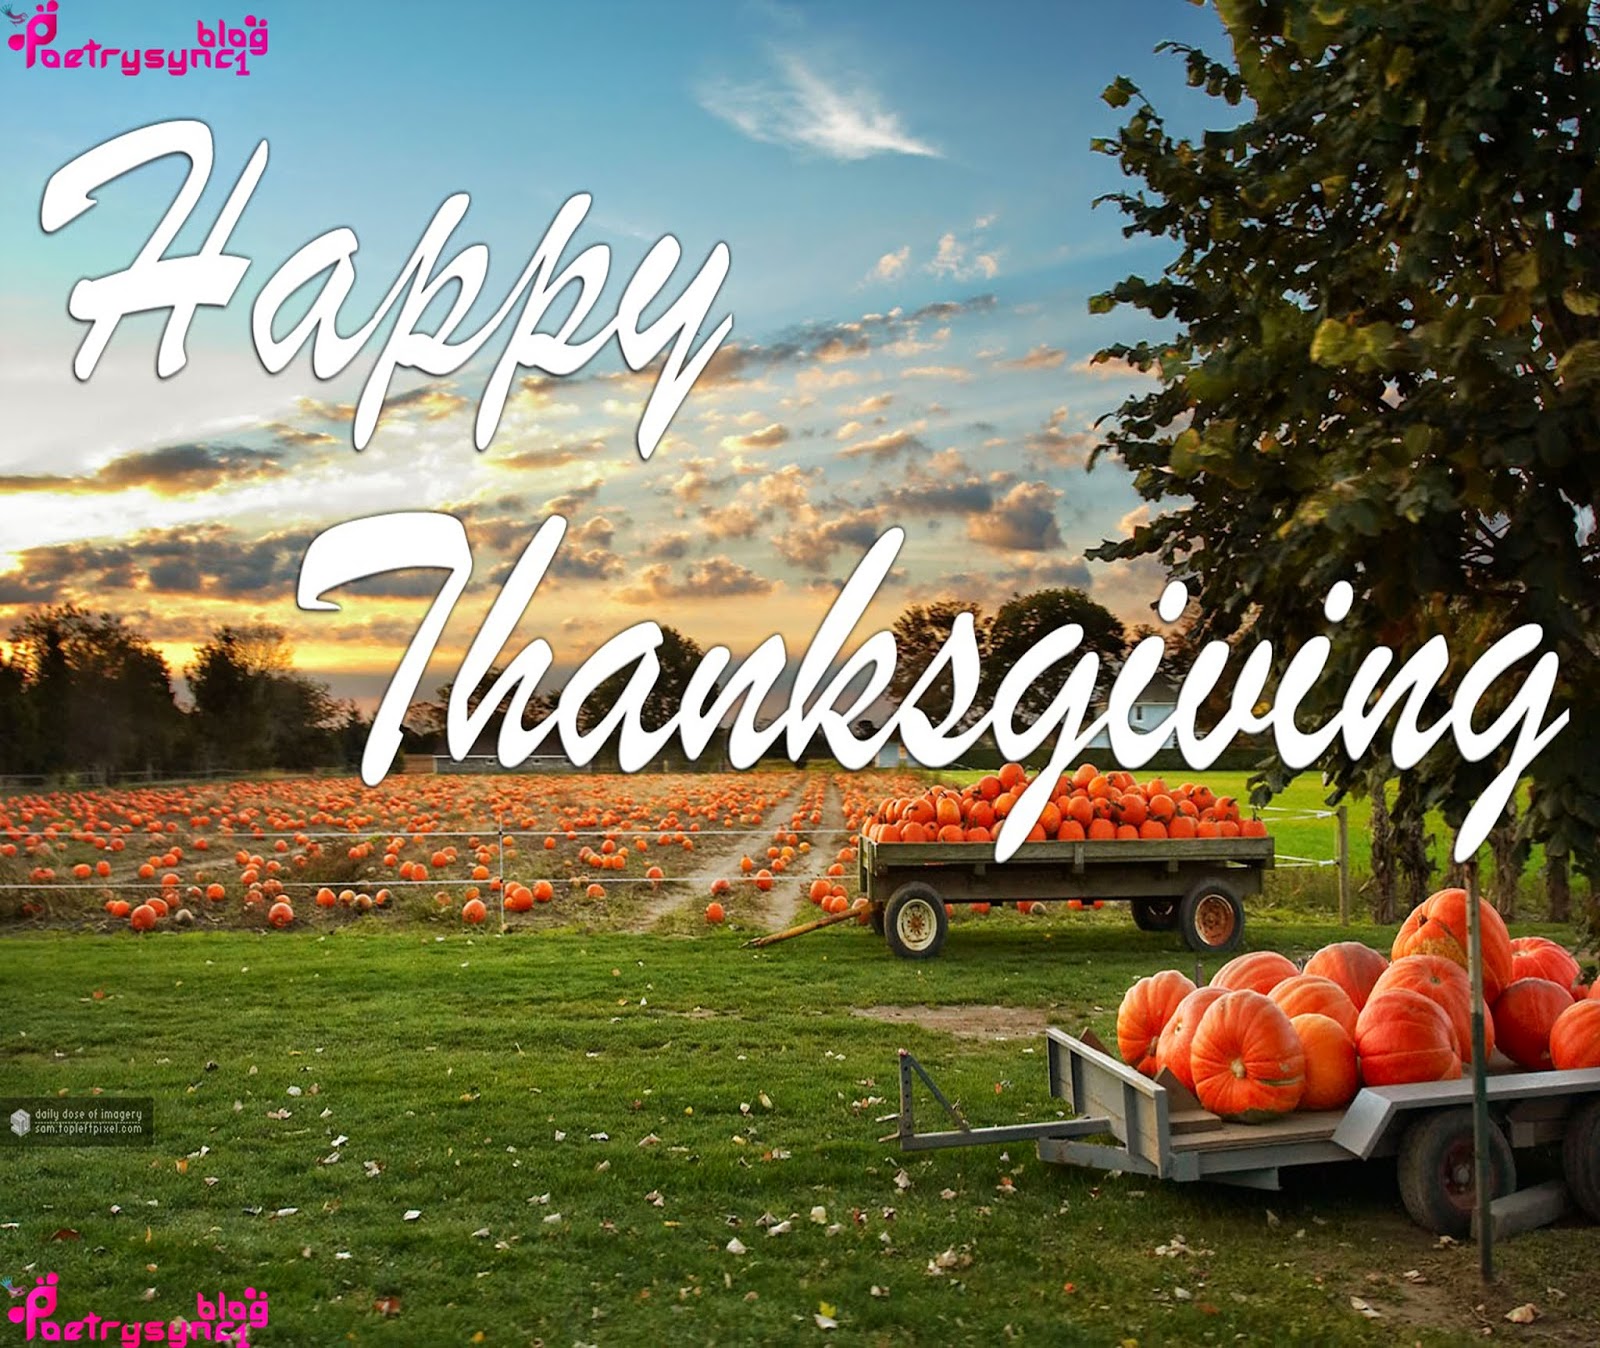 Happy-Thanksgiving-Day-Wallpaper-Image-With-Quotes-By-Poetrysync1.blog